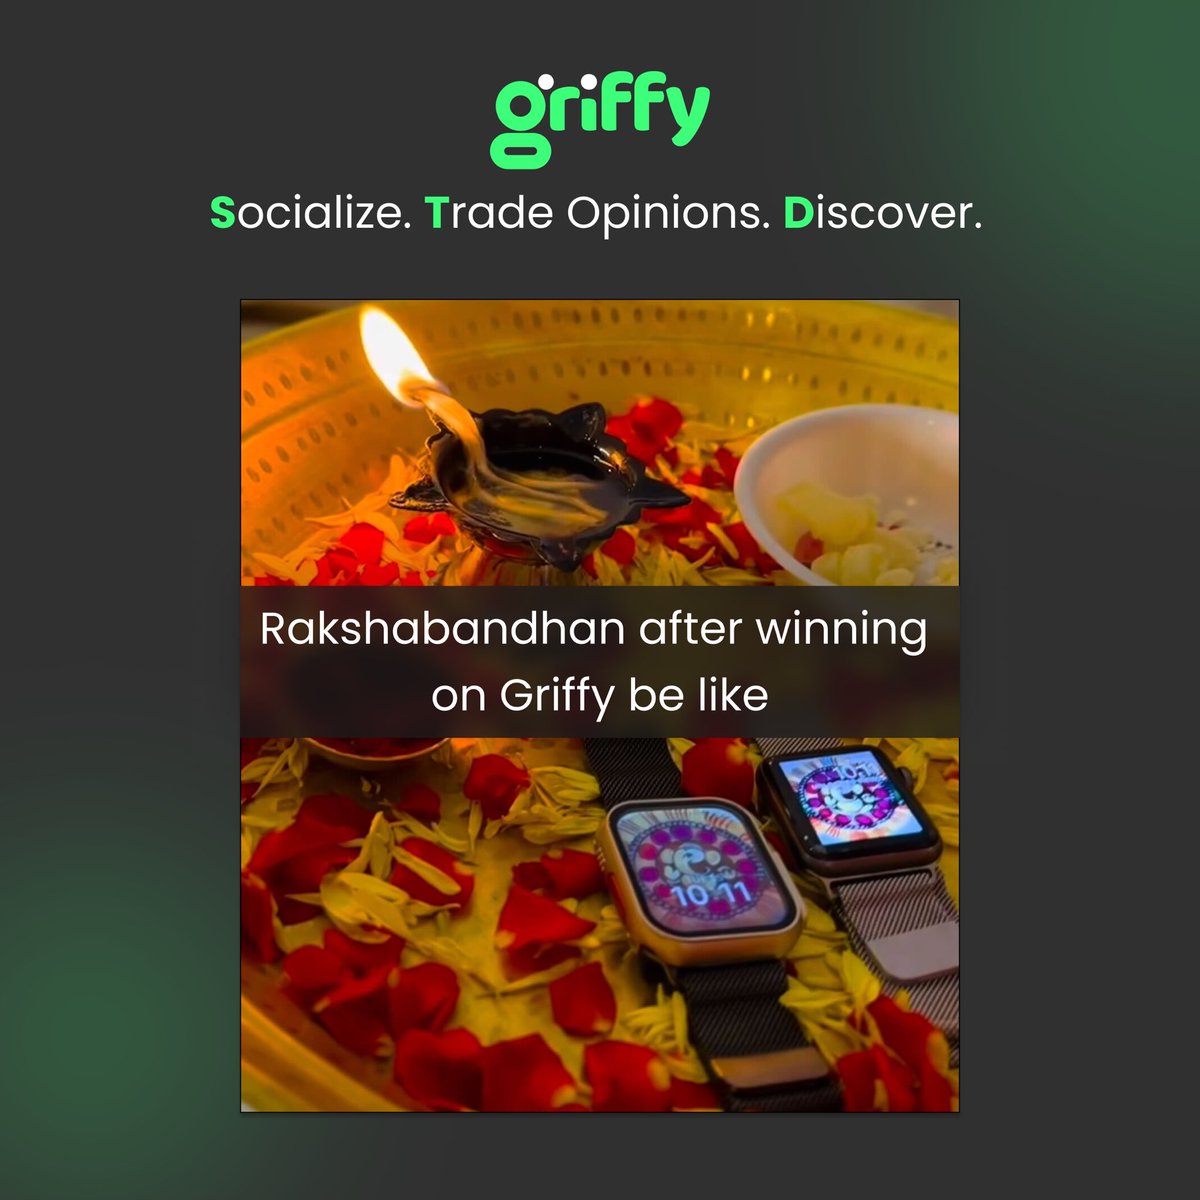 🎉 Celebrating Rakshabandhan in Style on Griffy! 🎊✨ Winning Moments, Memorable Bonds! 💖 Download the Griffy App now and make your Rakshabandhan even more special! 🌟🌈 #RakshabandhanJoy #GriffyWinners  #VoiceOnBlockchain #blockchains #Griffy #opiniontrading #crypto #airdrop